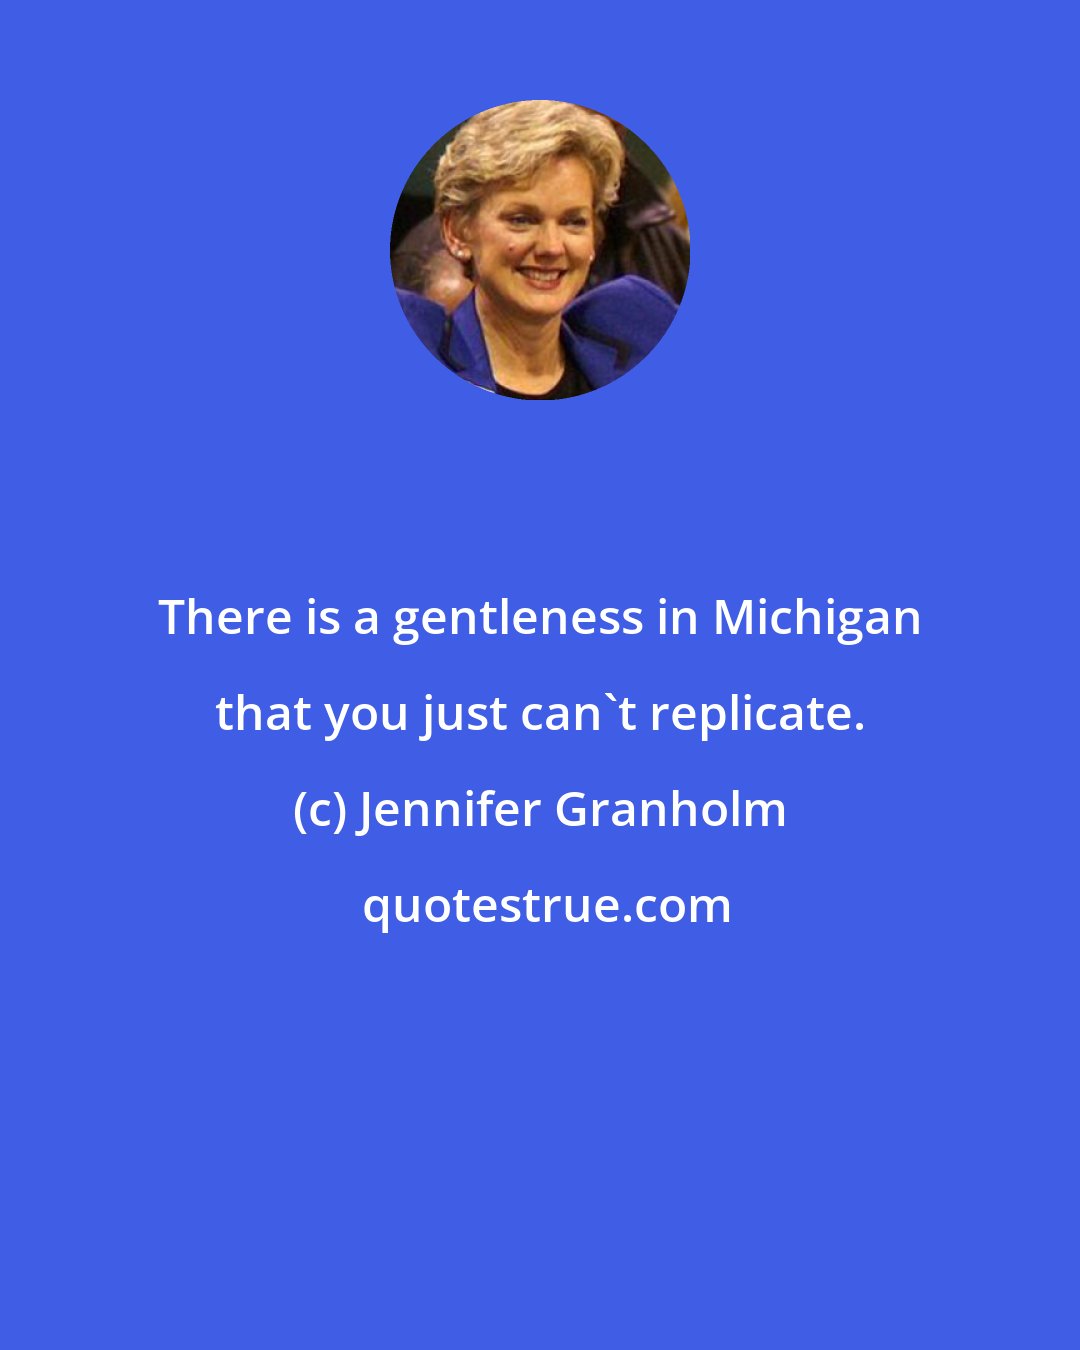 Jennifer Granholm: There is a gentleness in Michigan that you just can't replicate.